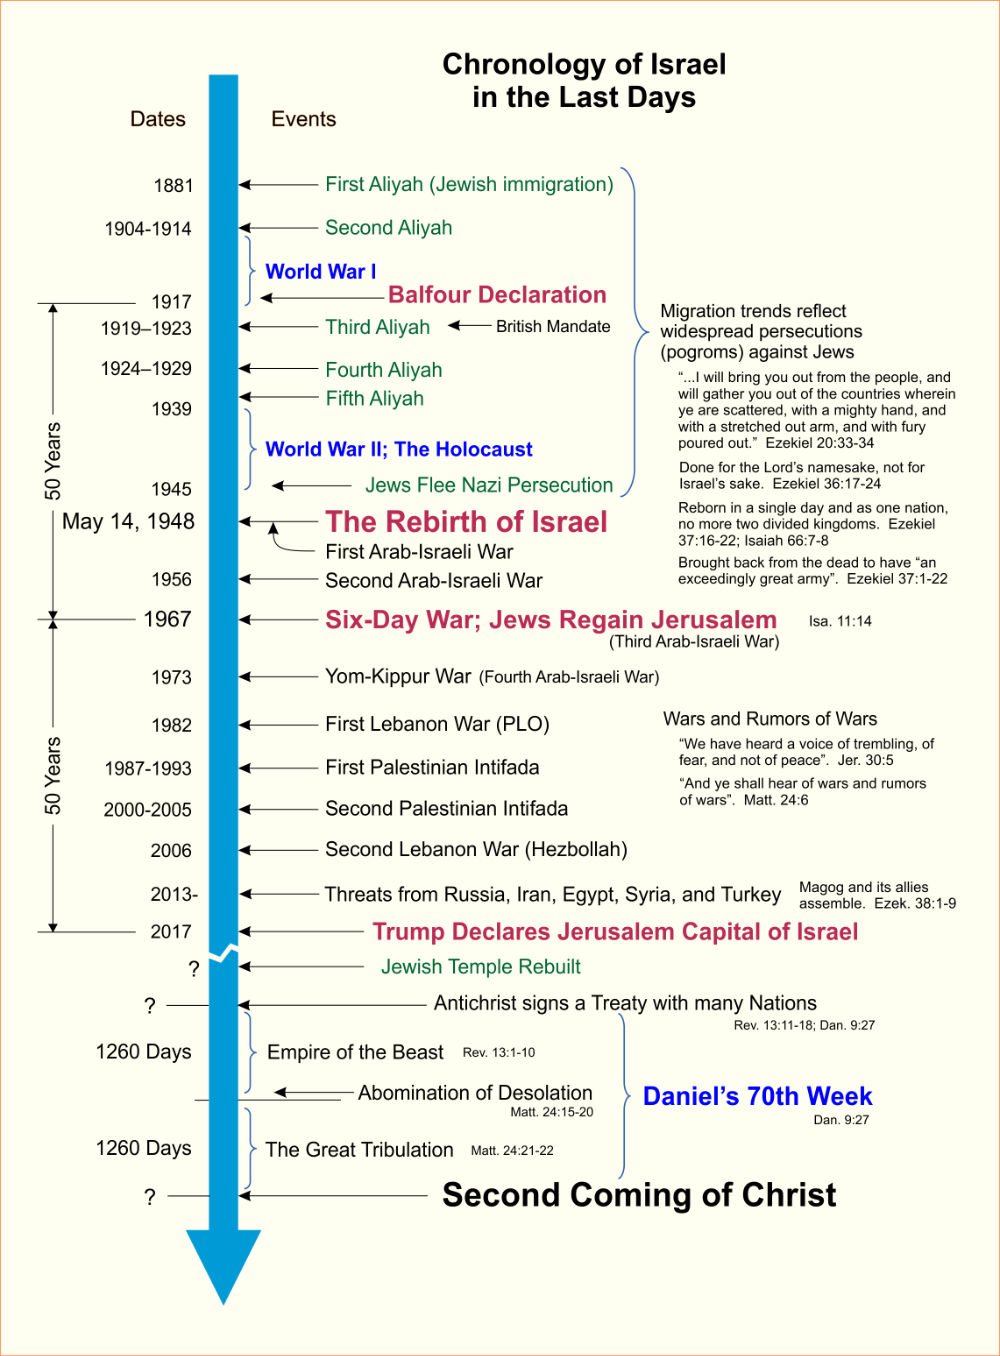 Sda End Time Events Chart